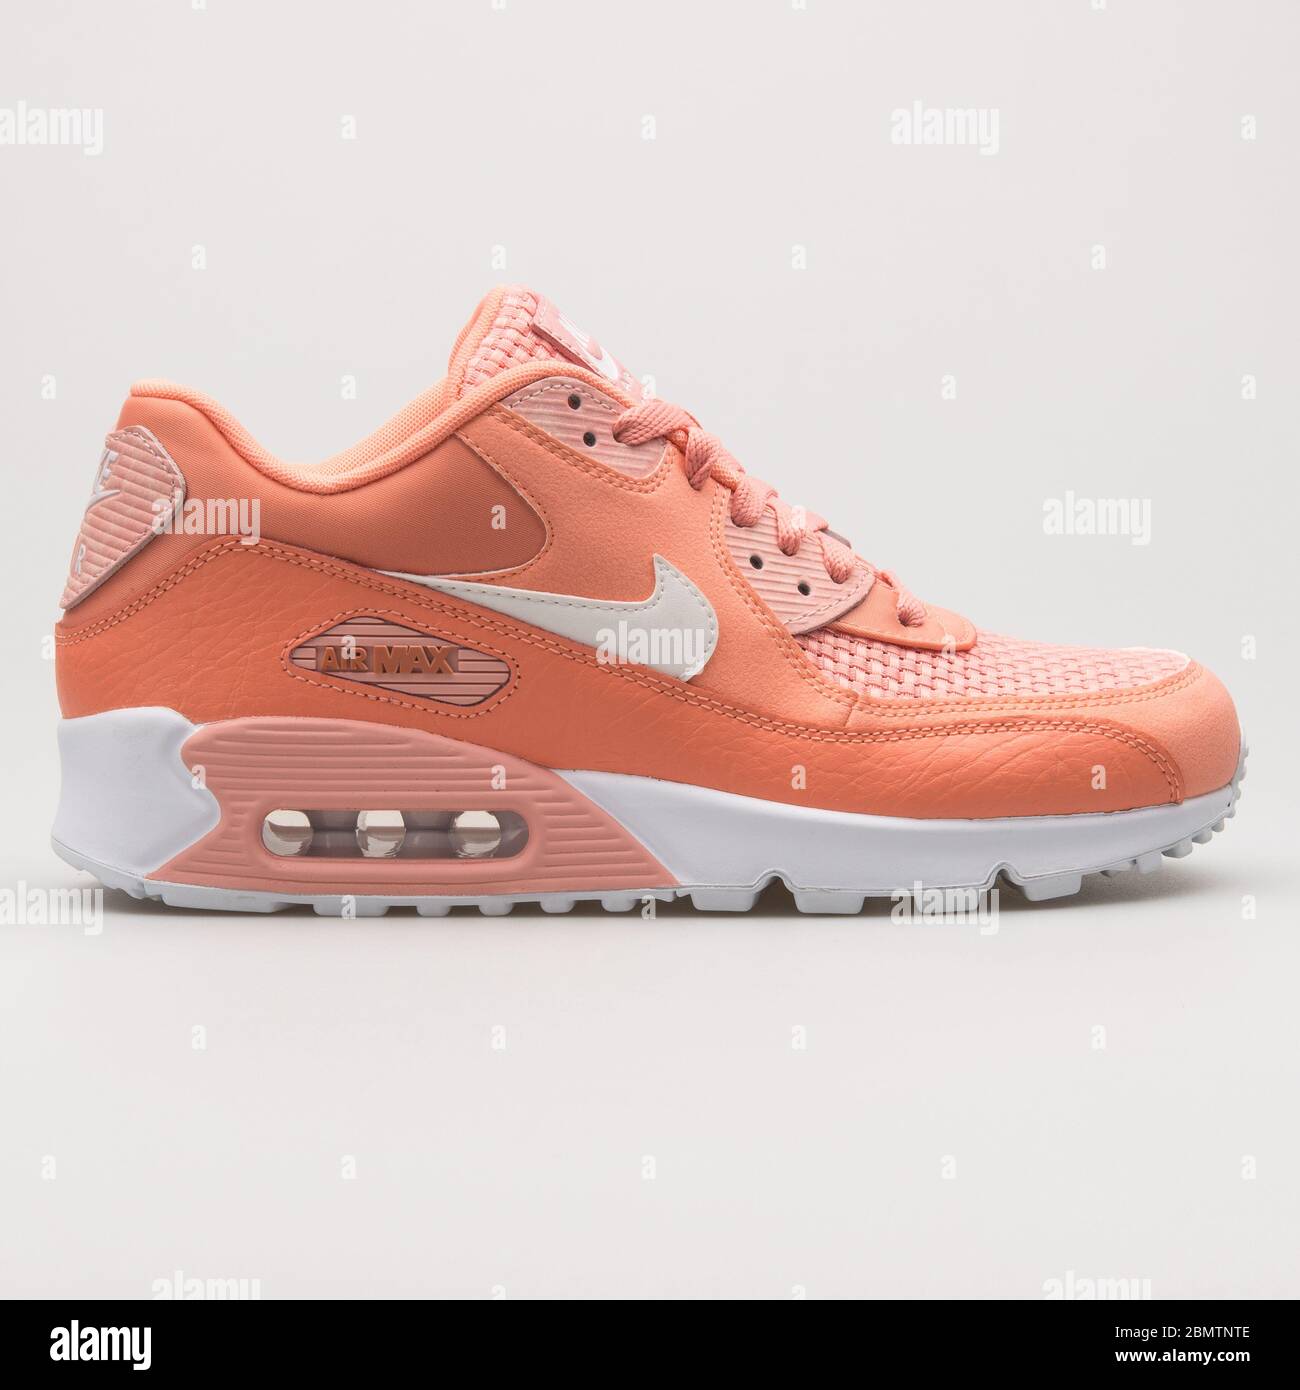 Page 4 - Orange Nike Sneakers High Resolution Stock Photography and Images  - Alamy